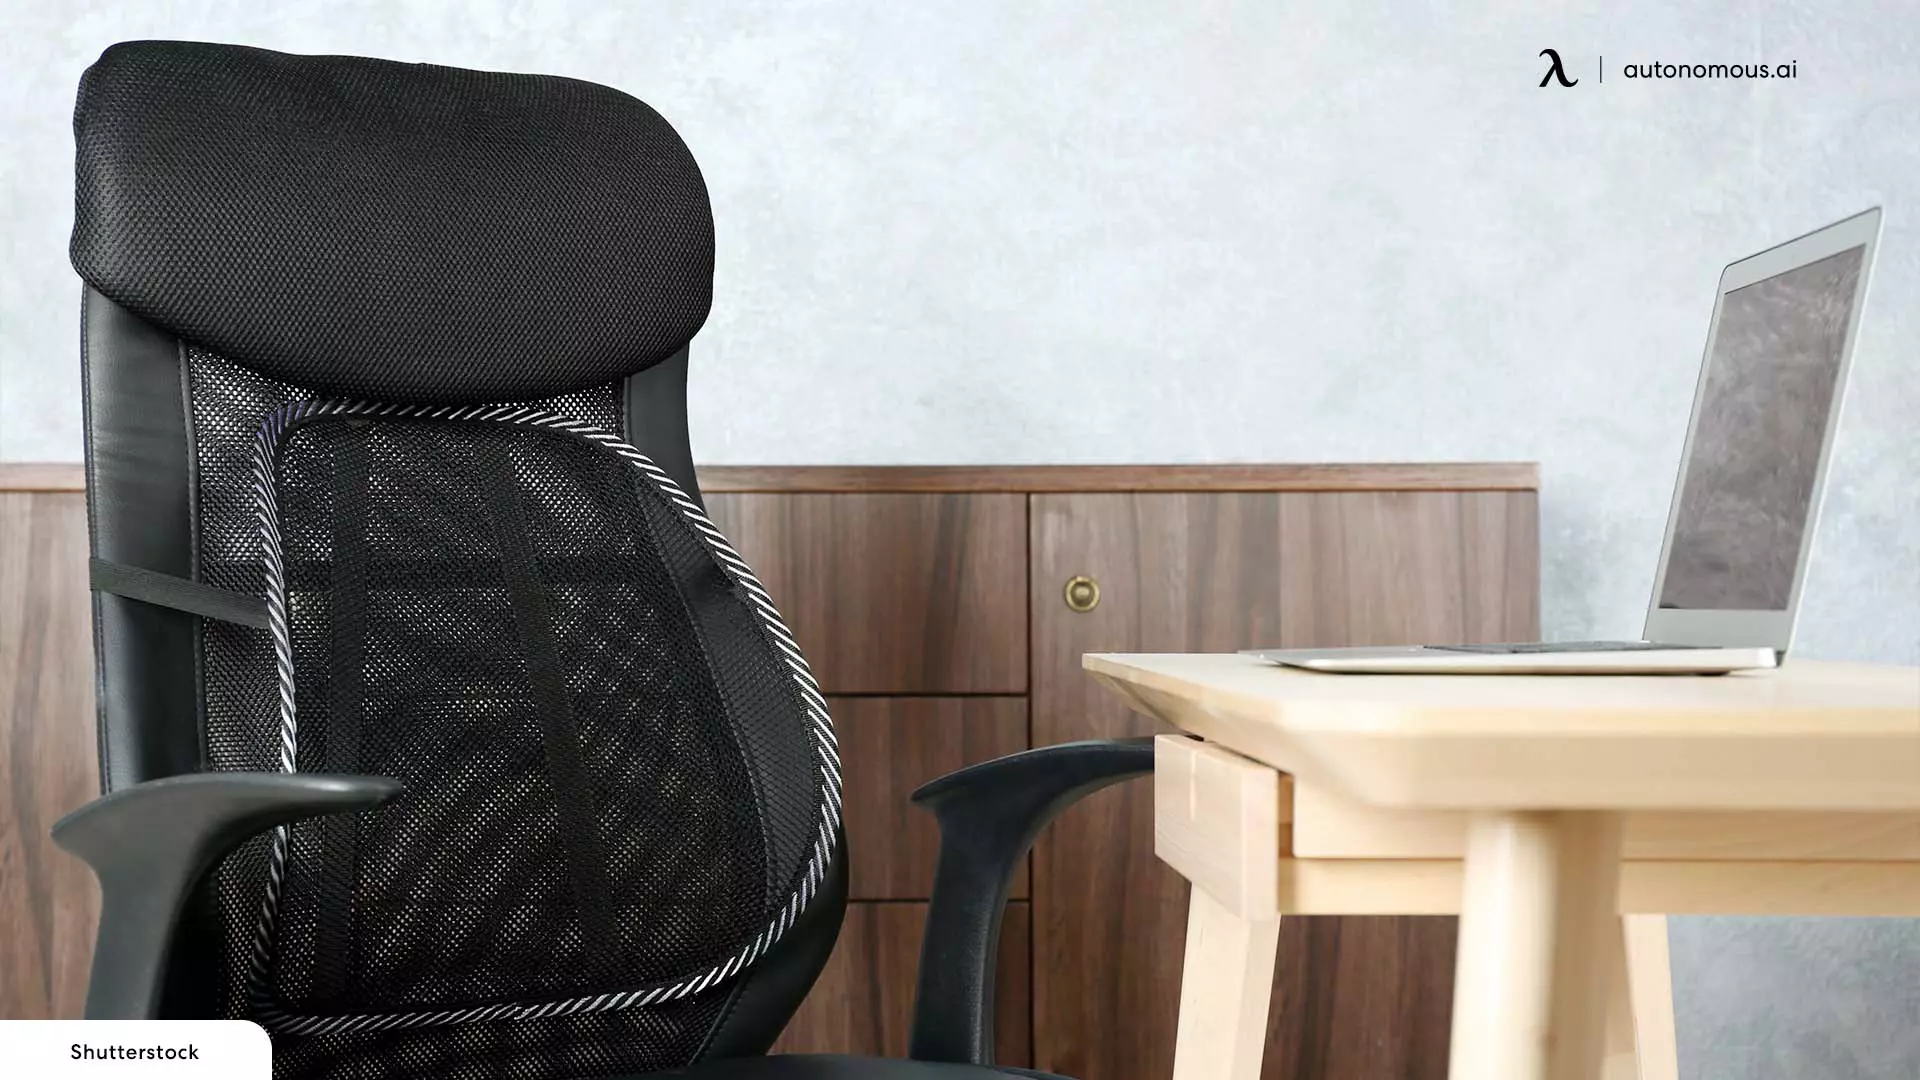 Office chairs are designed for lumbar support